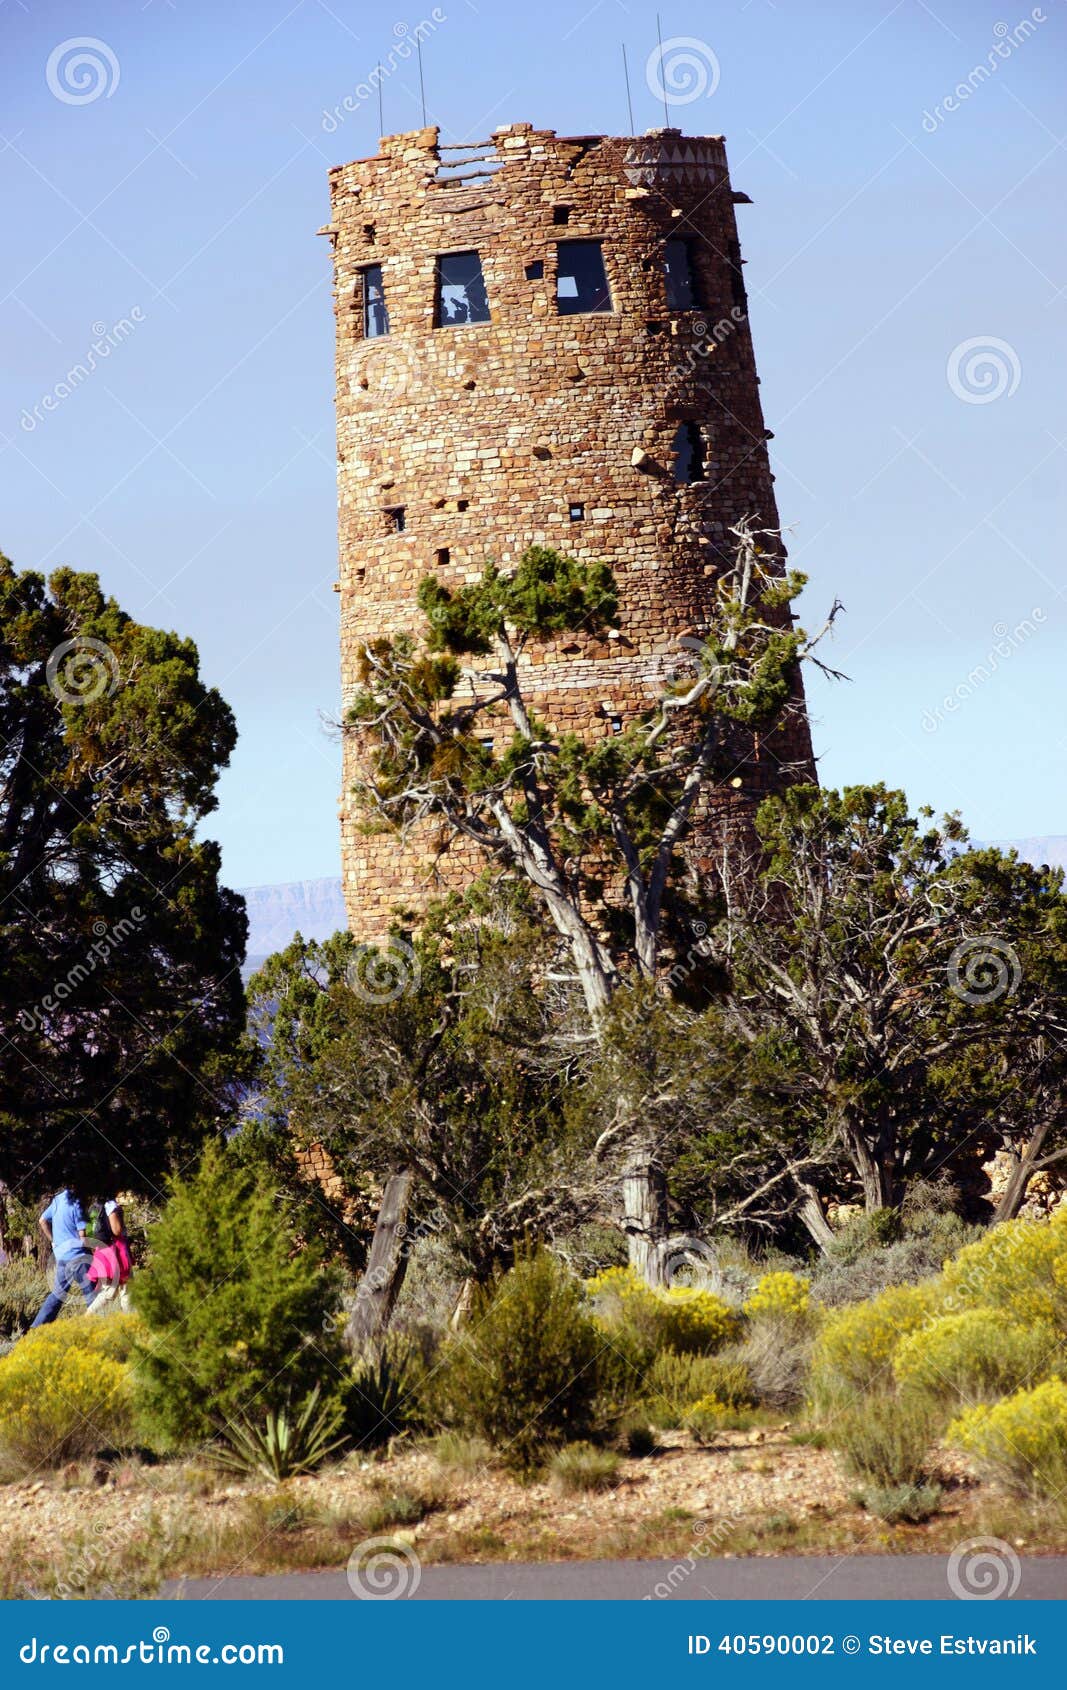 Watchtower of local stones stock photo. Image of watchtower - 40590002